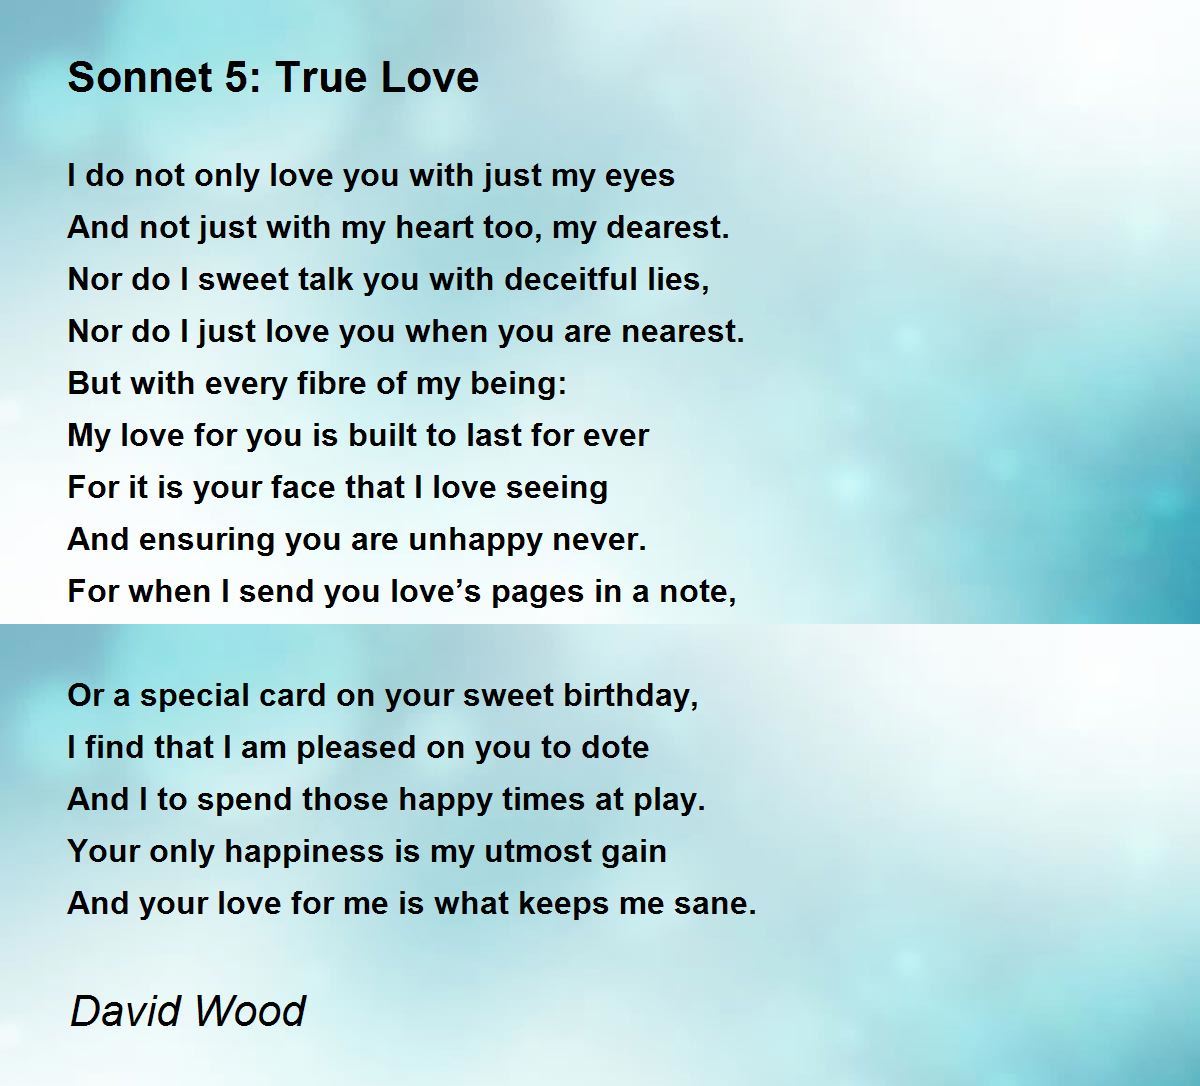 sonnet poems about love